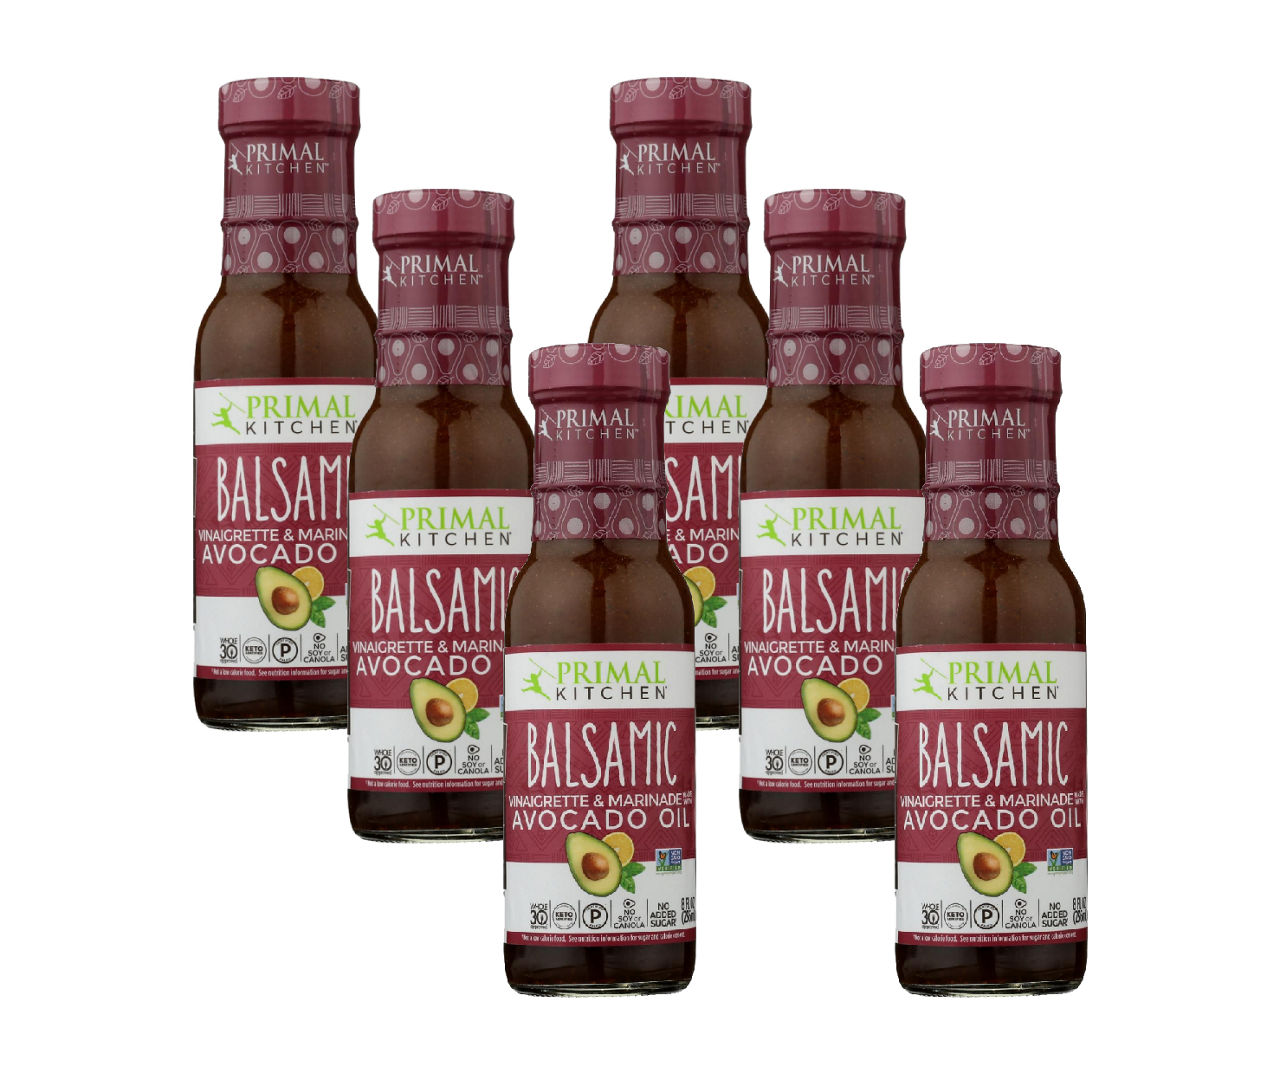 Primal Kitchen Caesar Dressing and Marinade with Avocado Oil, 8 Ounce -- 6  per case